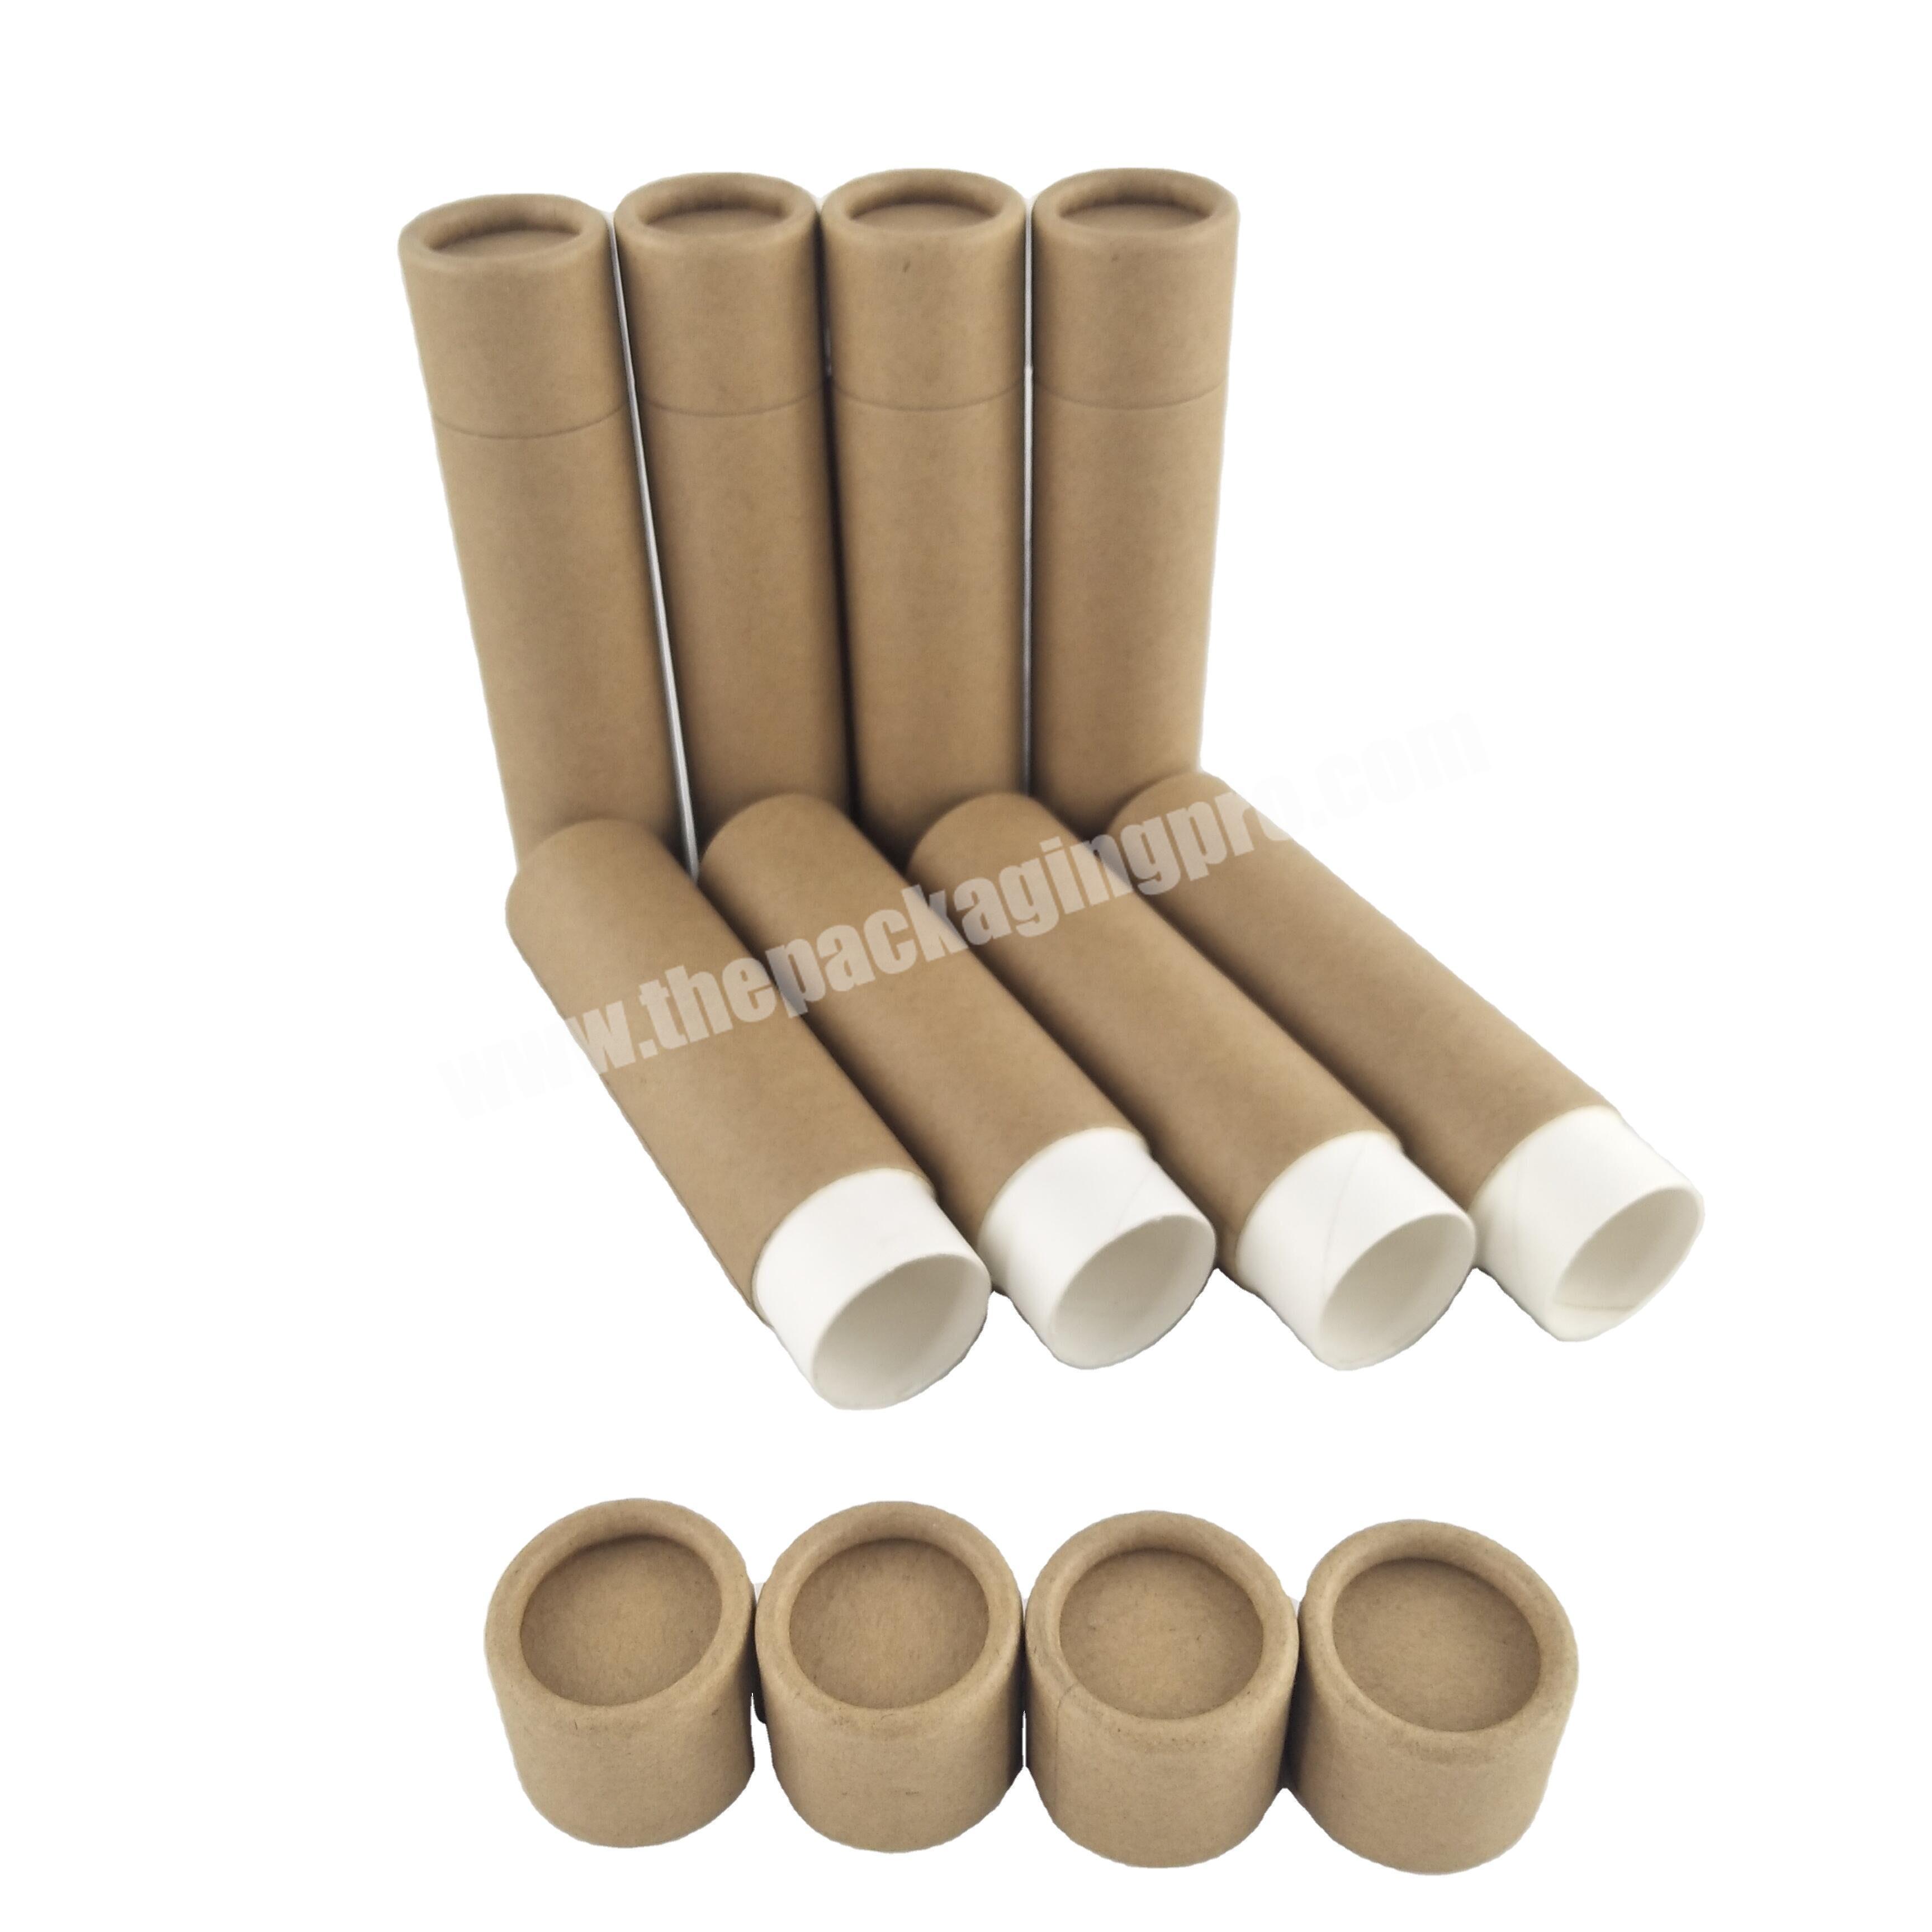 Eco friendly bamboo Kraft paper deodorant containers cardboard packaging